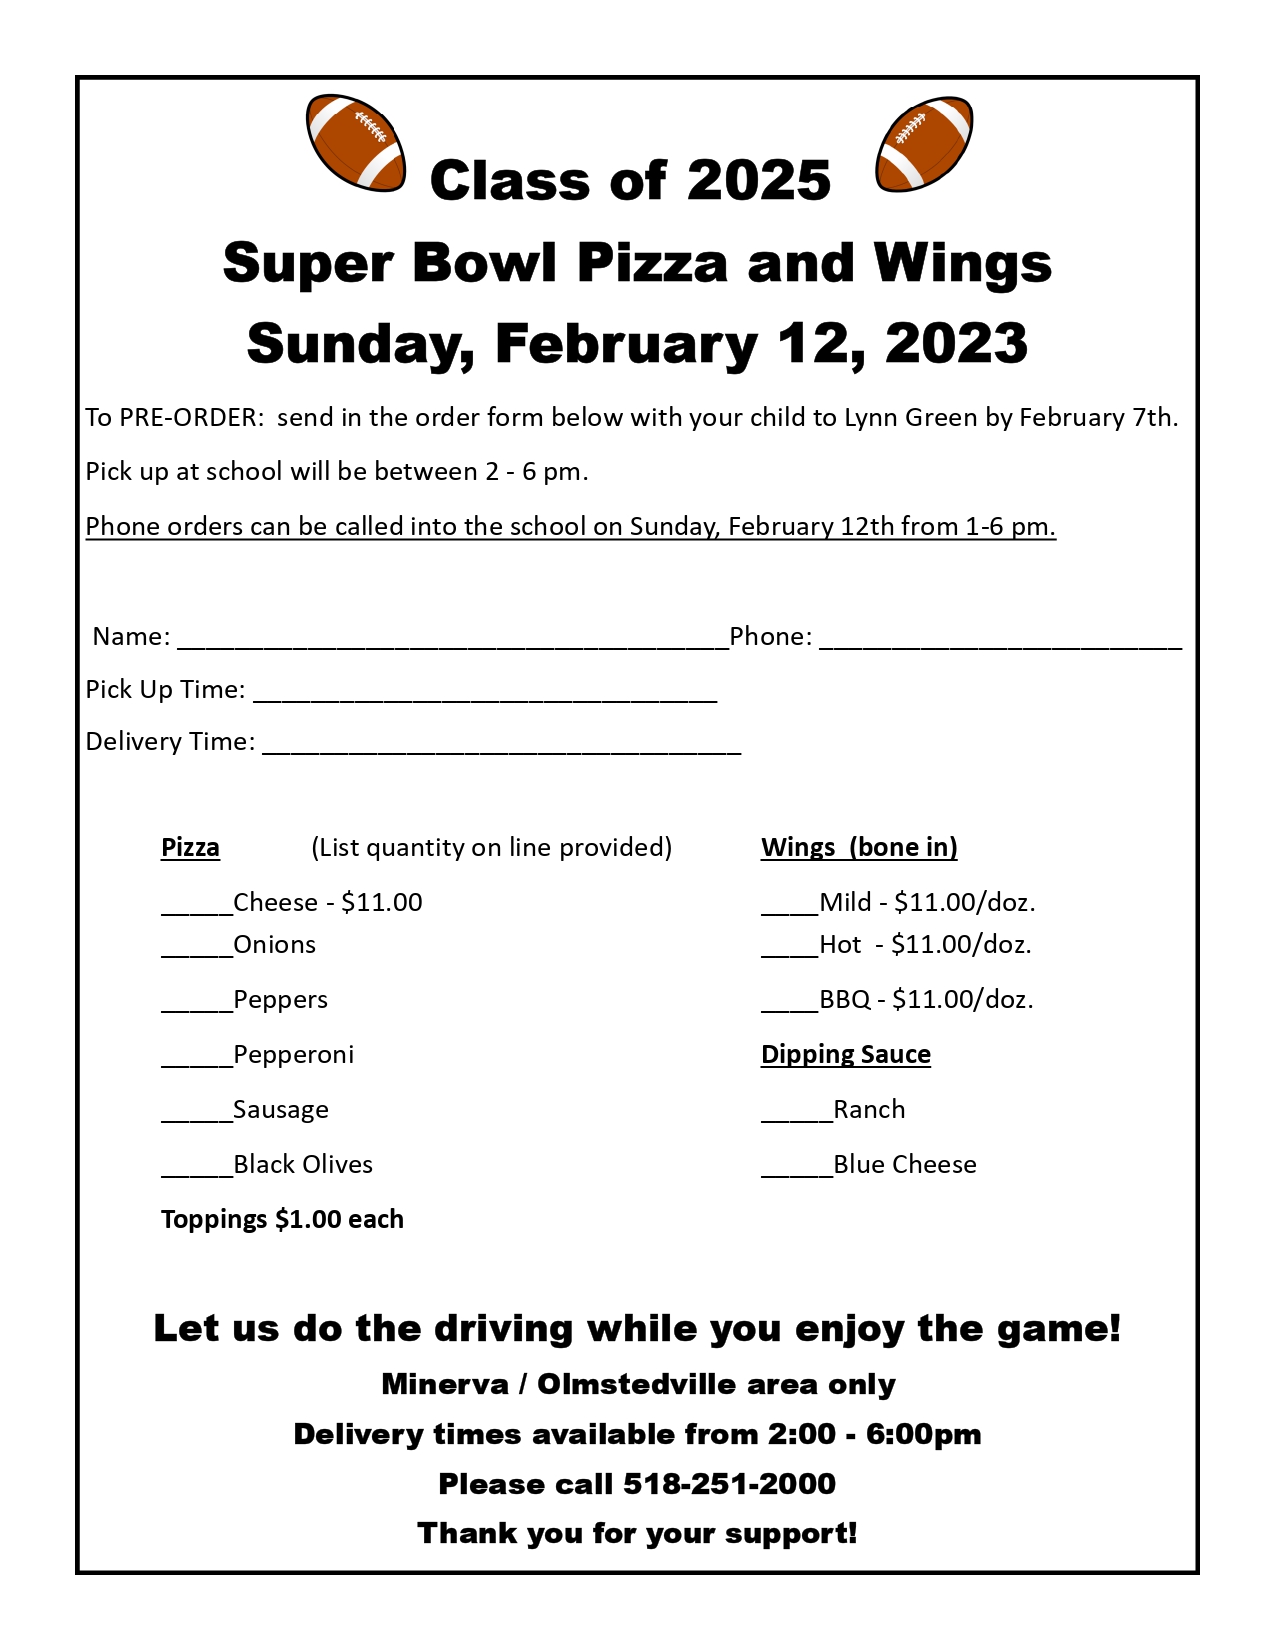 Superbowl Pizza and Wings February 12 2023 call 518 252 2000